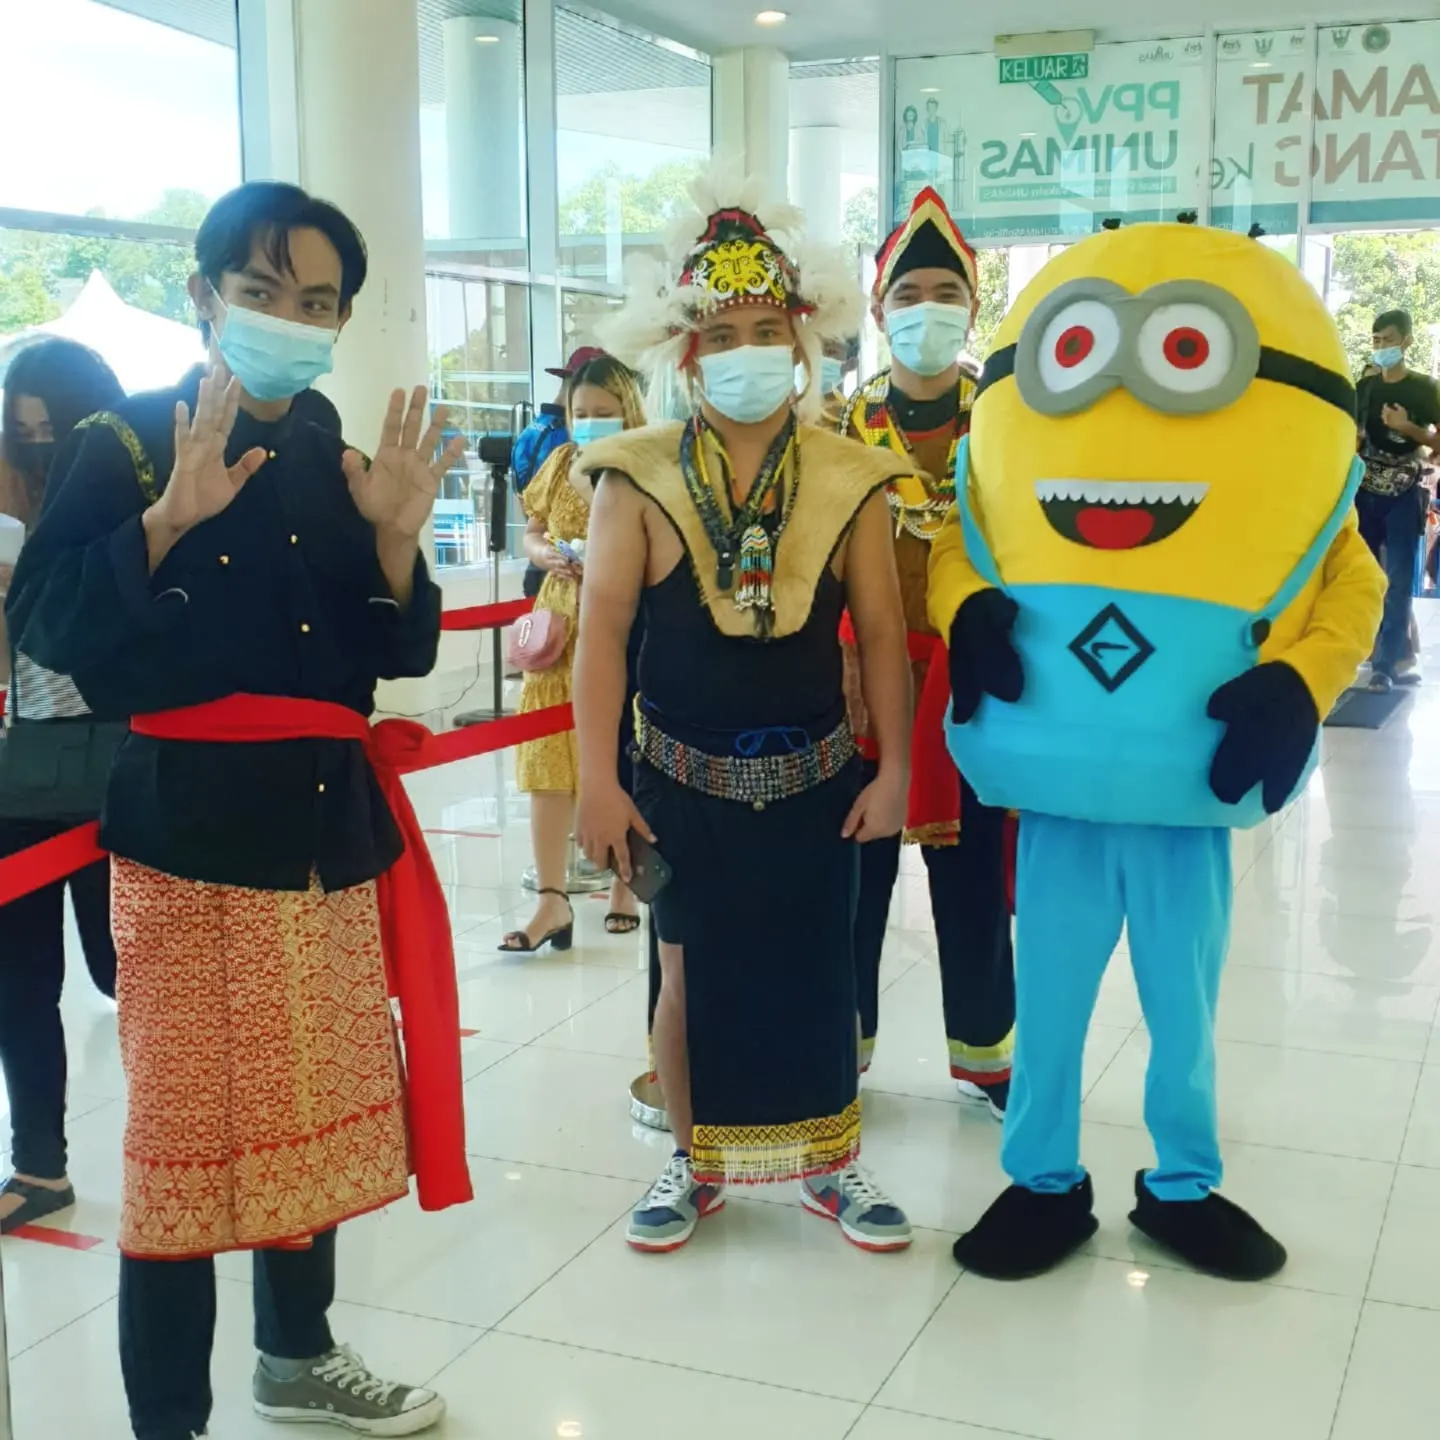 Ppv staff wear traditional costumes to celebrate sarawak's independence day